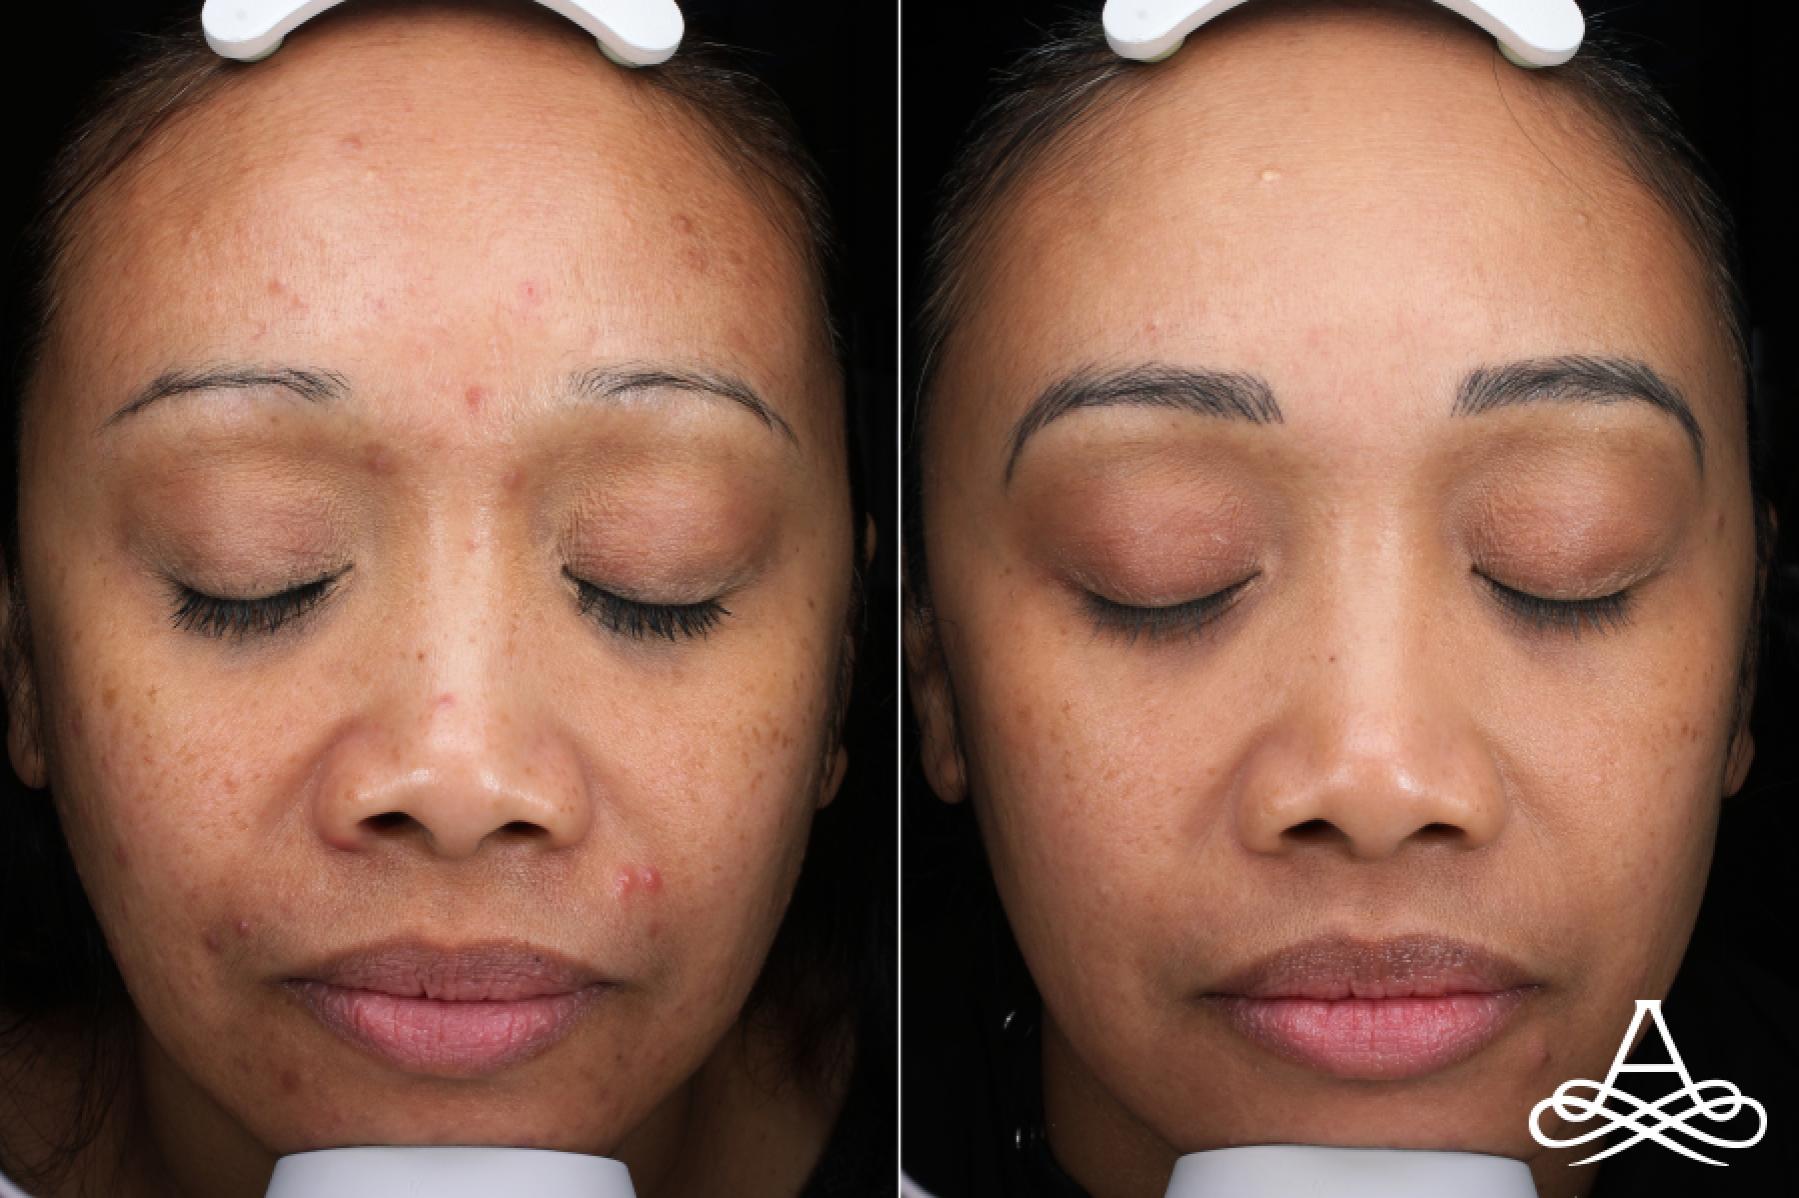 Acne Scars: Patient 2 - Before and After 1